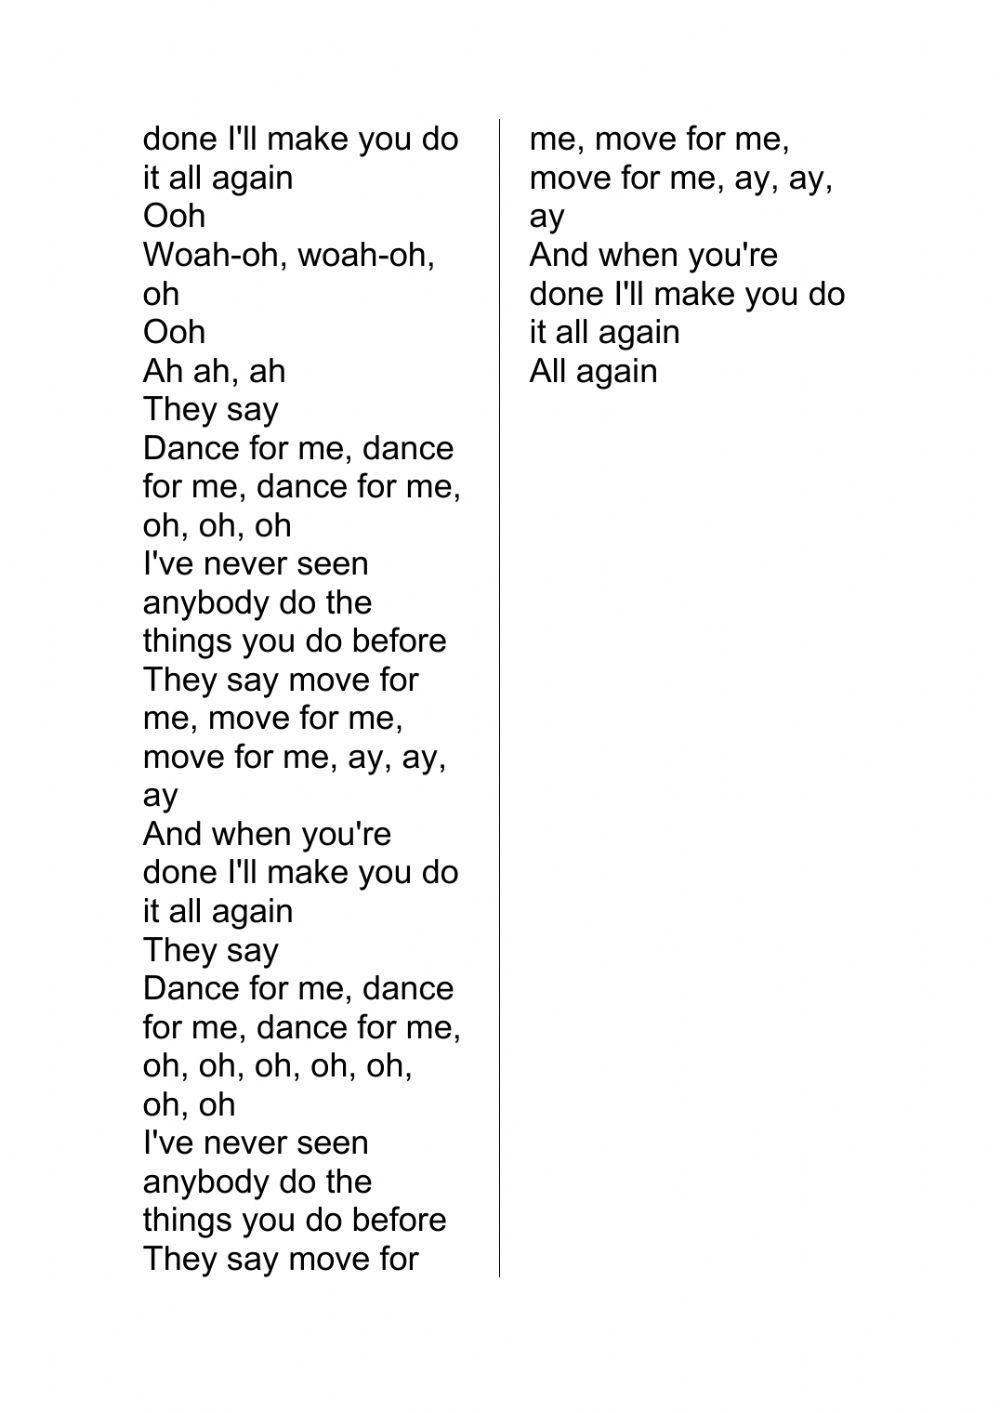 Dance Monkey - song and lyrics by Tones Five